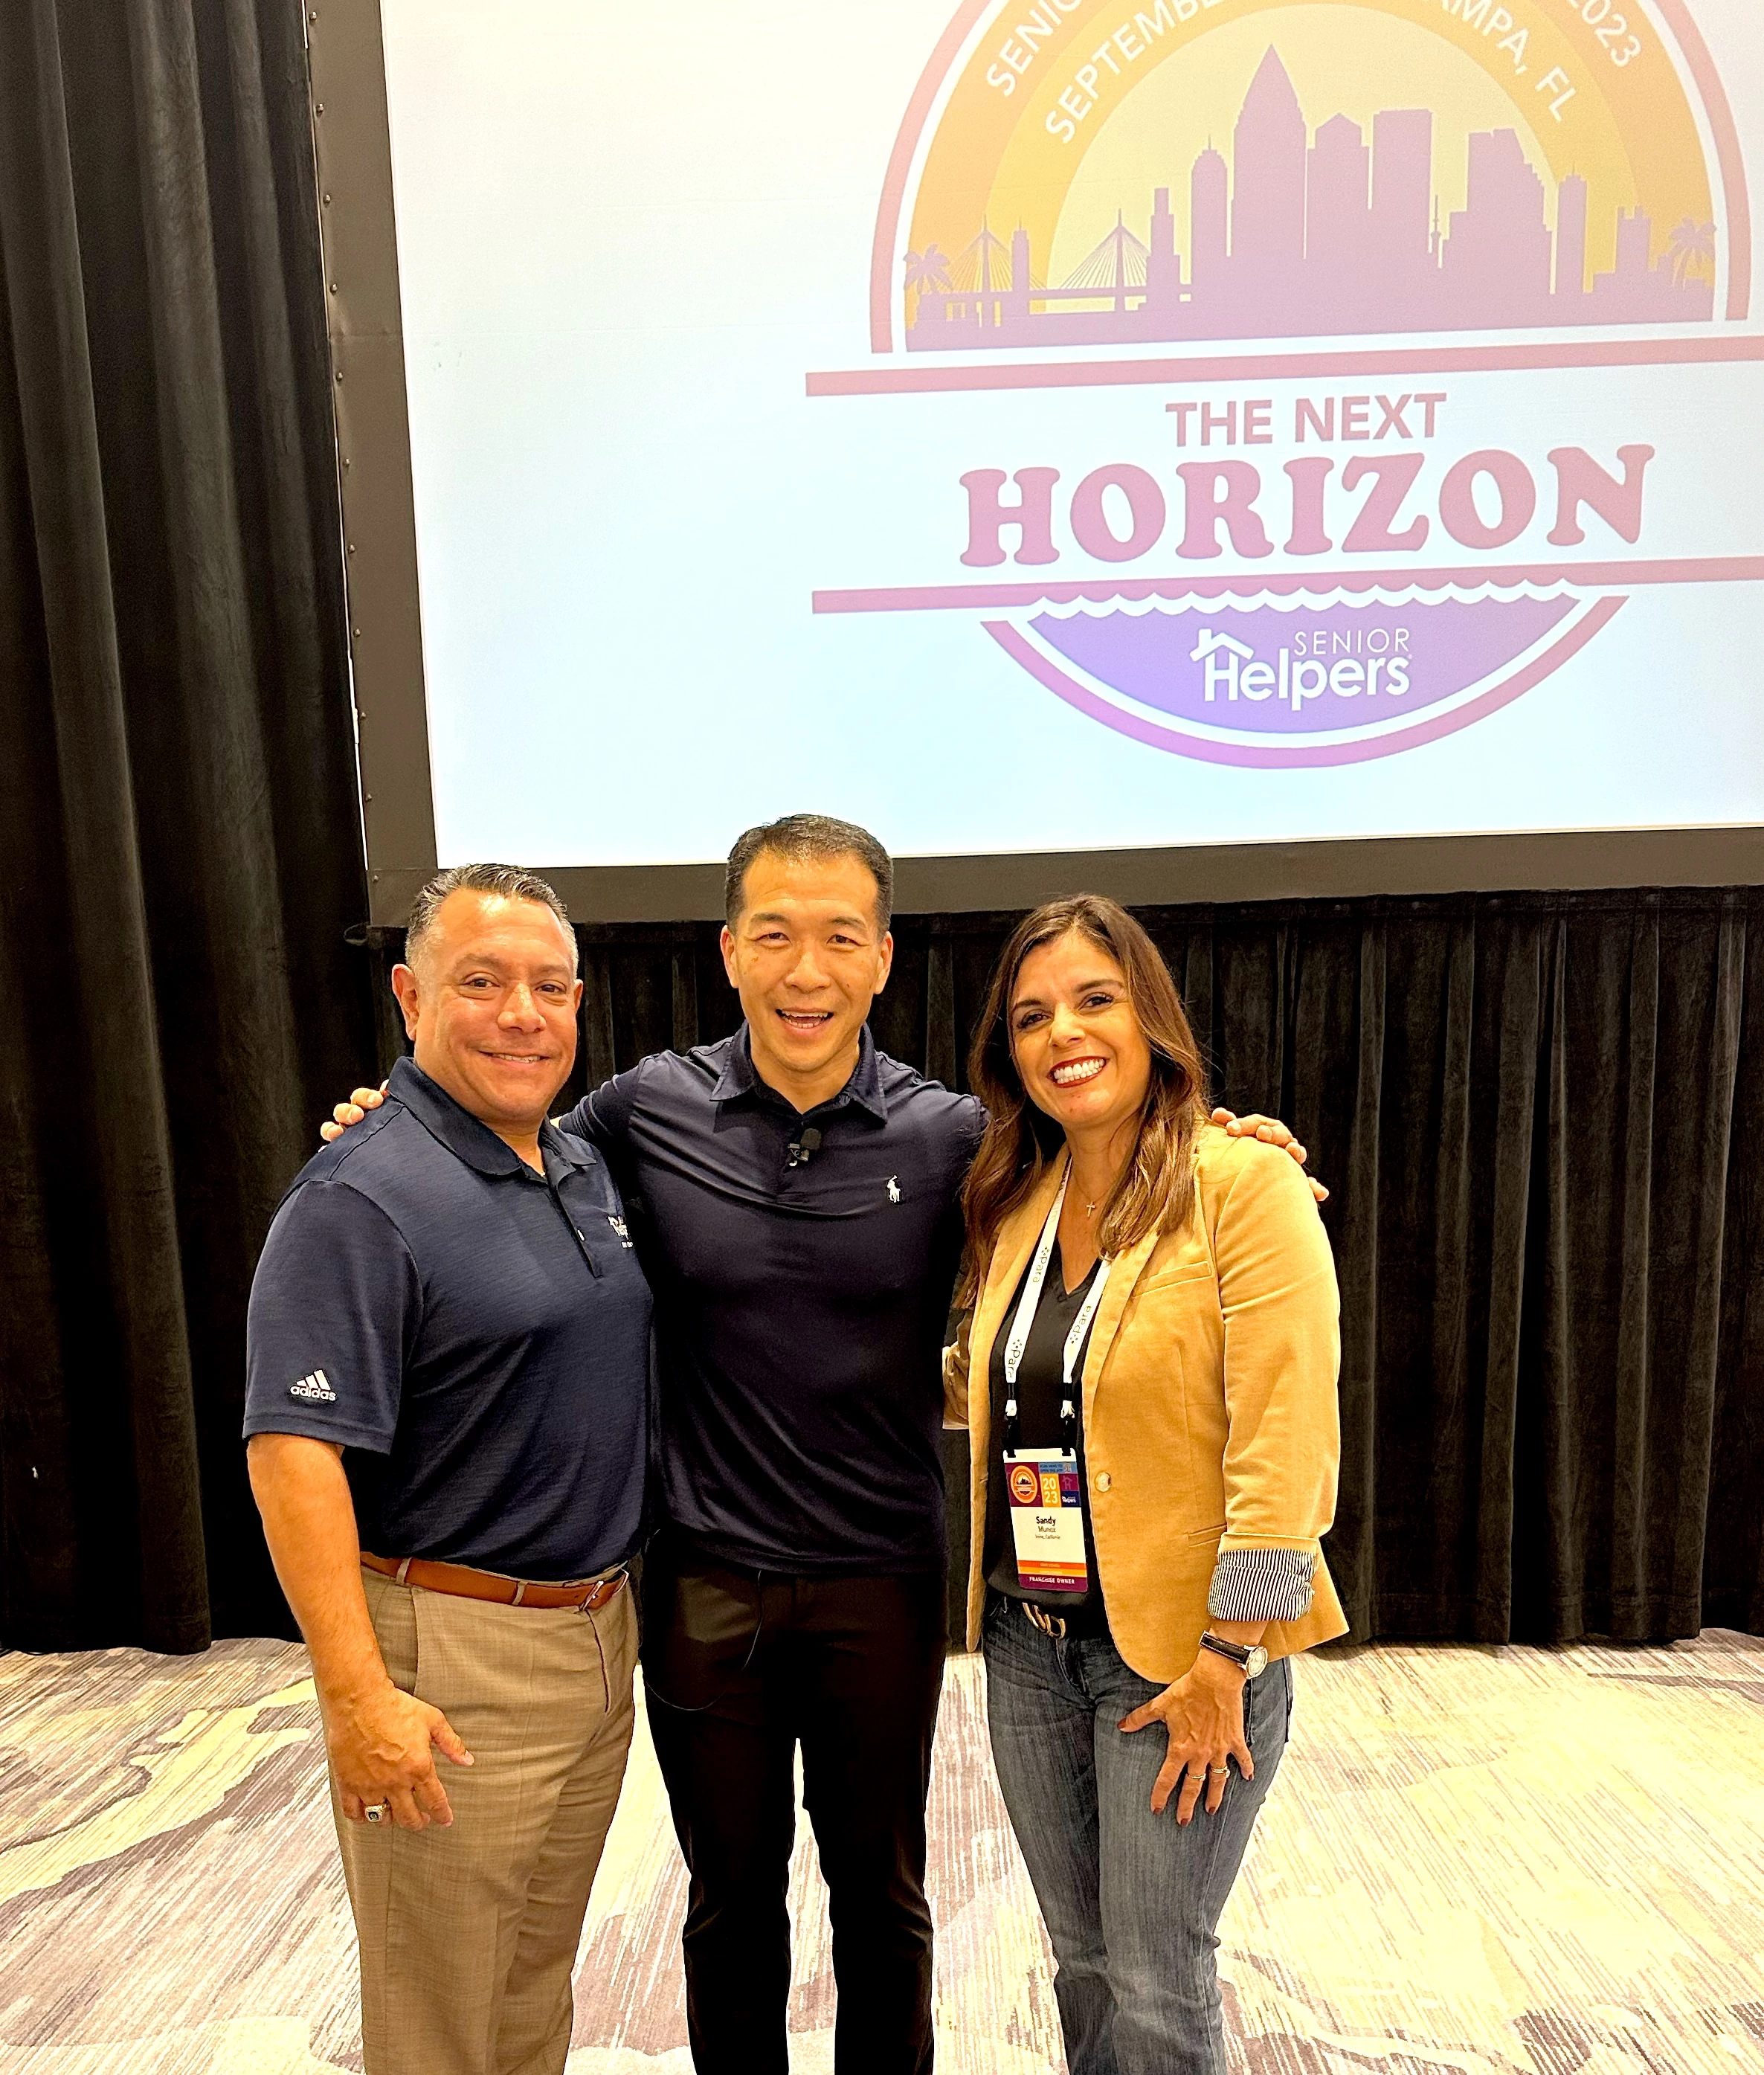 Sandy and I are humbled for the opportunity to have met Jimmy Choi, American Ninja Warrior and an individual beating Parkinson's disease in a very inspiring way. Fitness and a positive attitude are extremely important. Striving to be better than the previous day makes all the difference. These are values we live by. Be your best!